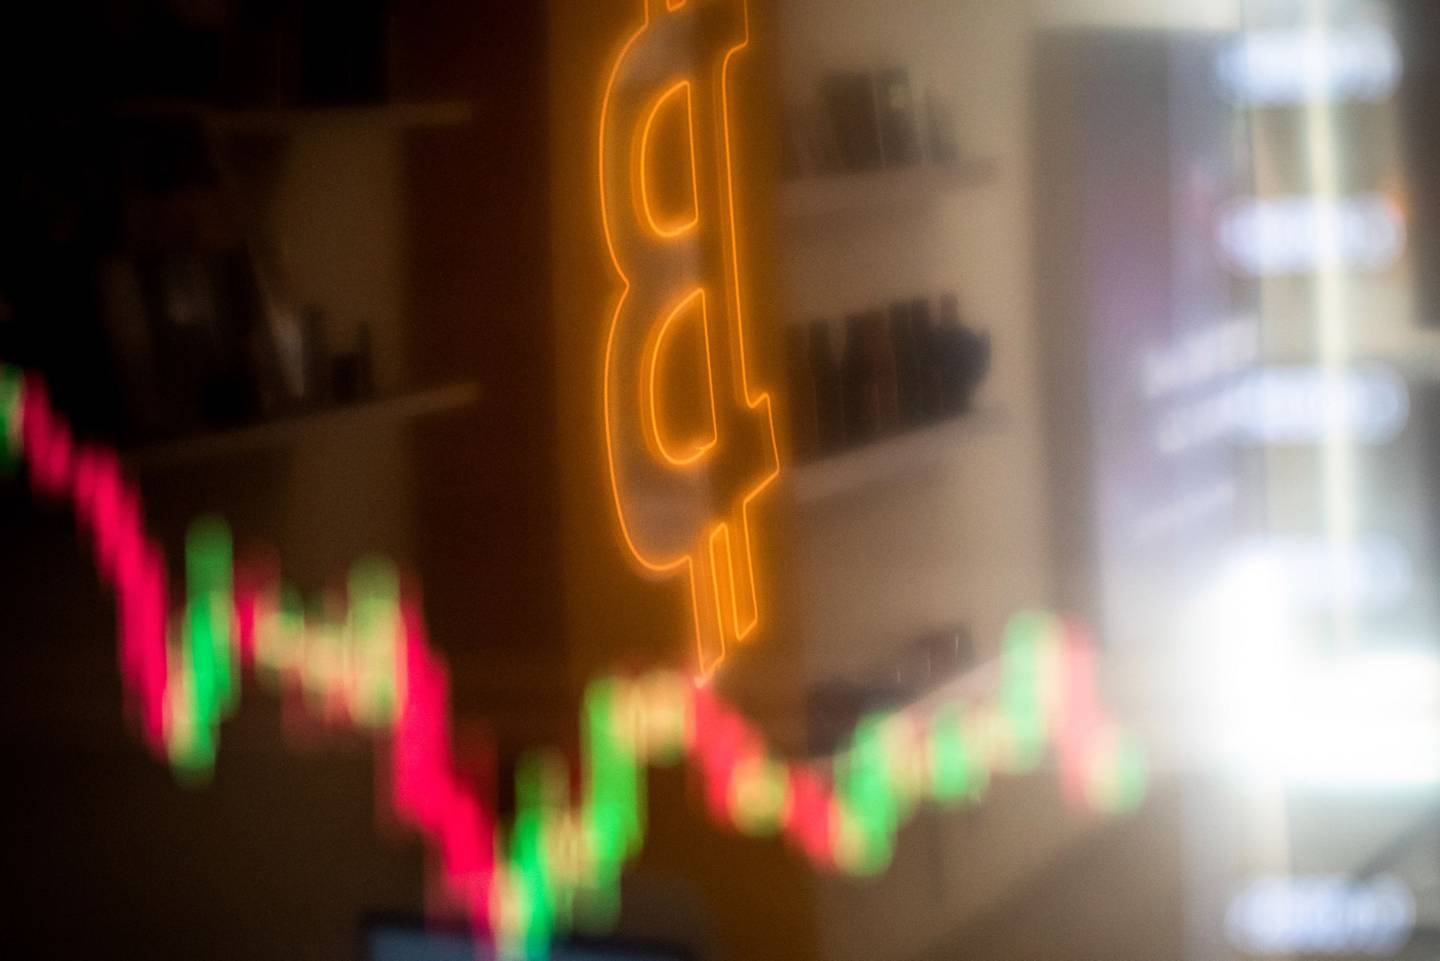 A reflection of a candlestick price chart and an illuminated Bitcoin logo inside a BitBase cryptocurrency exchange in Barcelona.